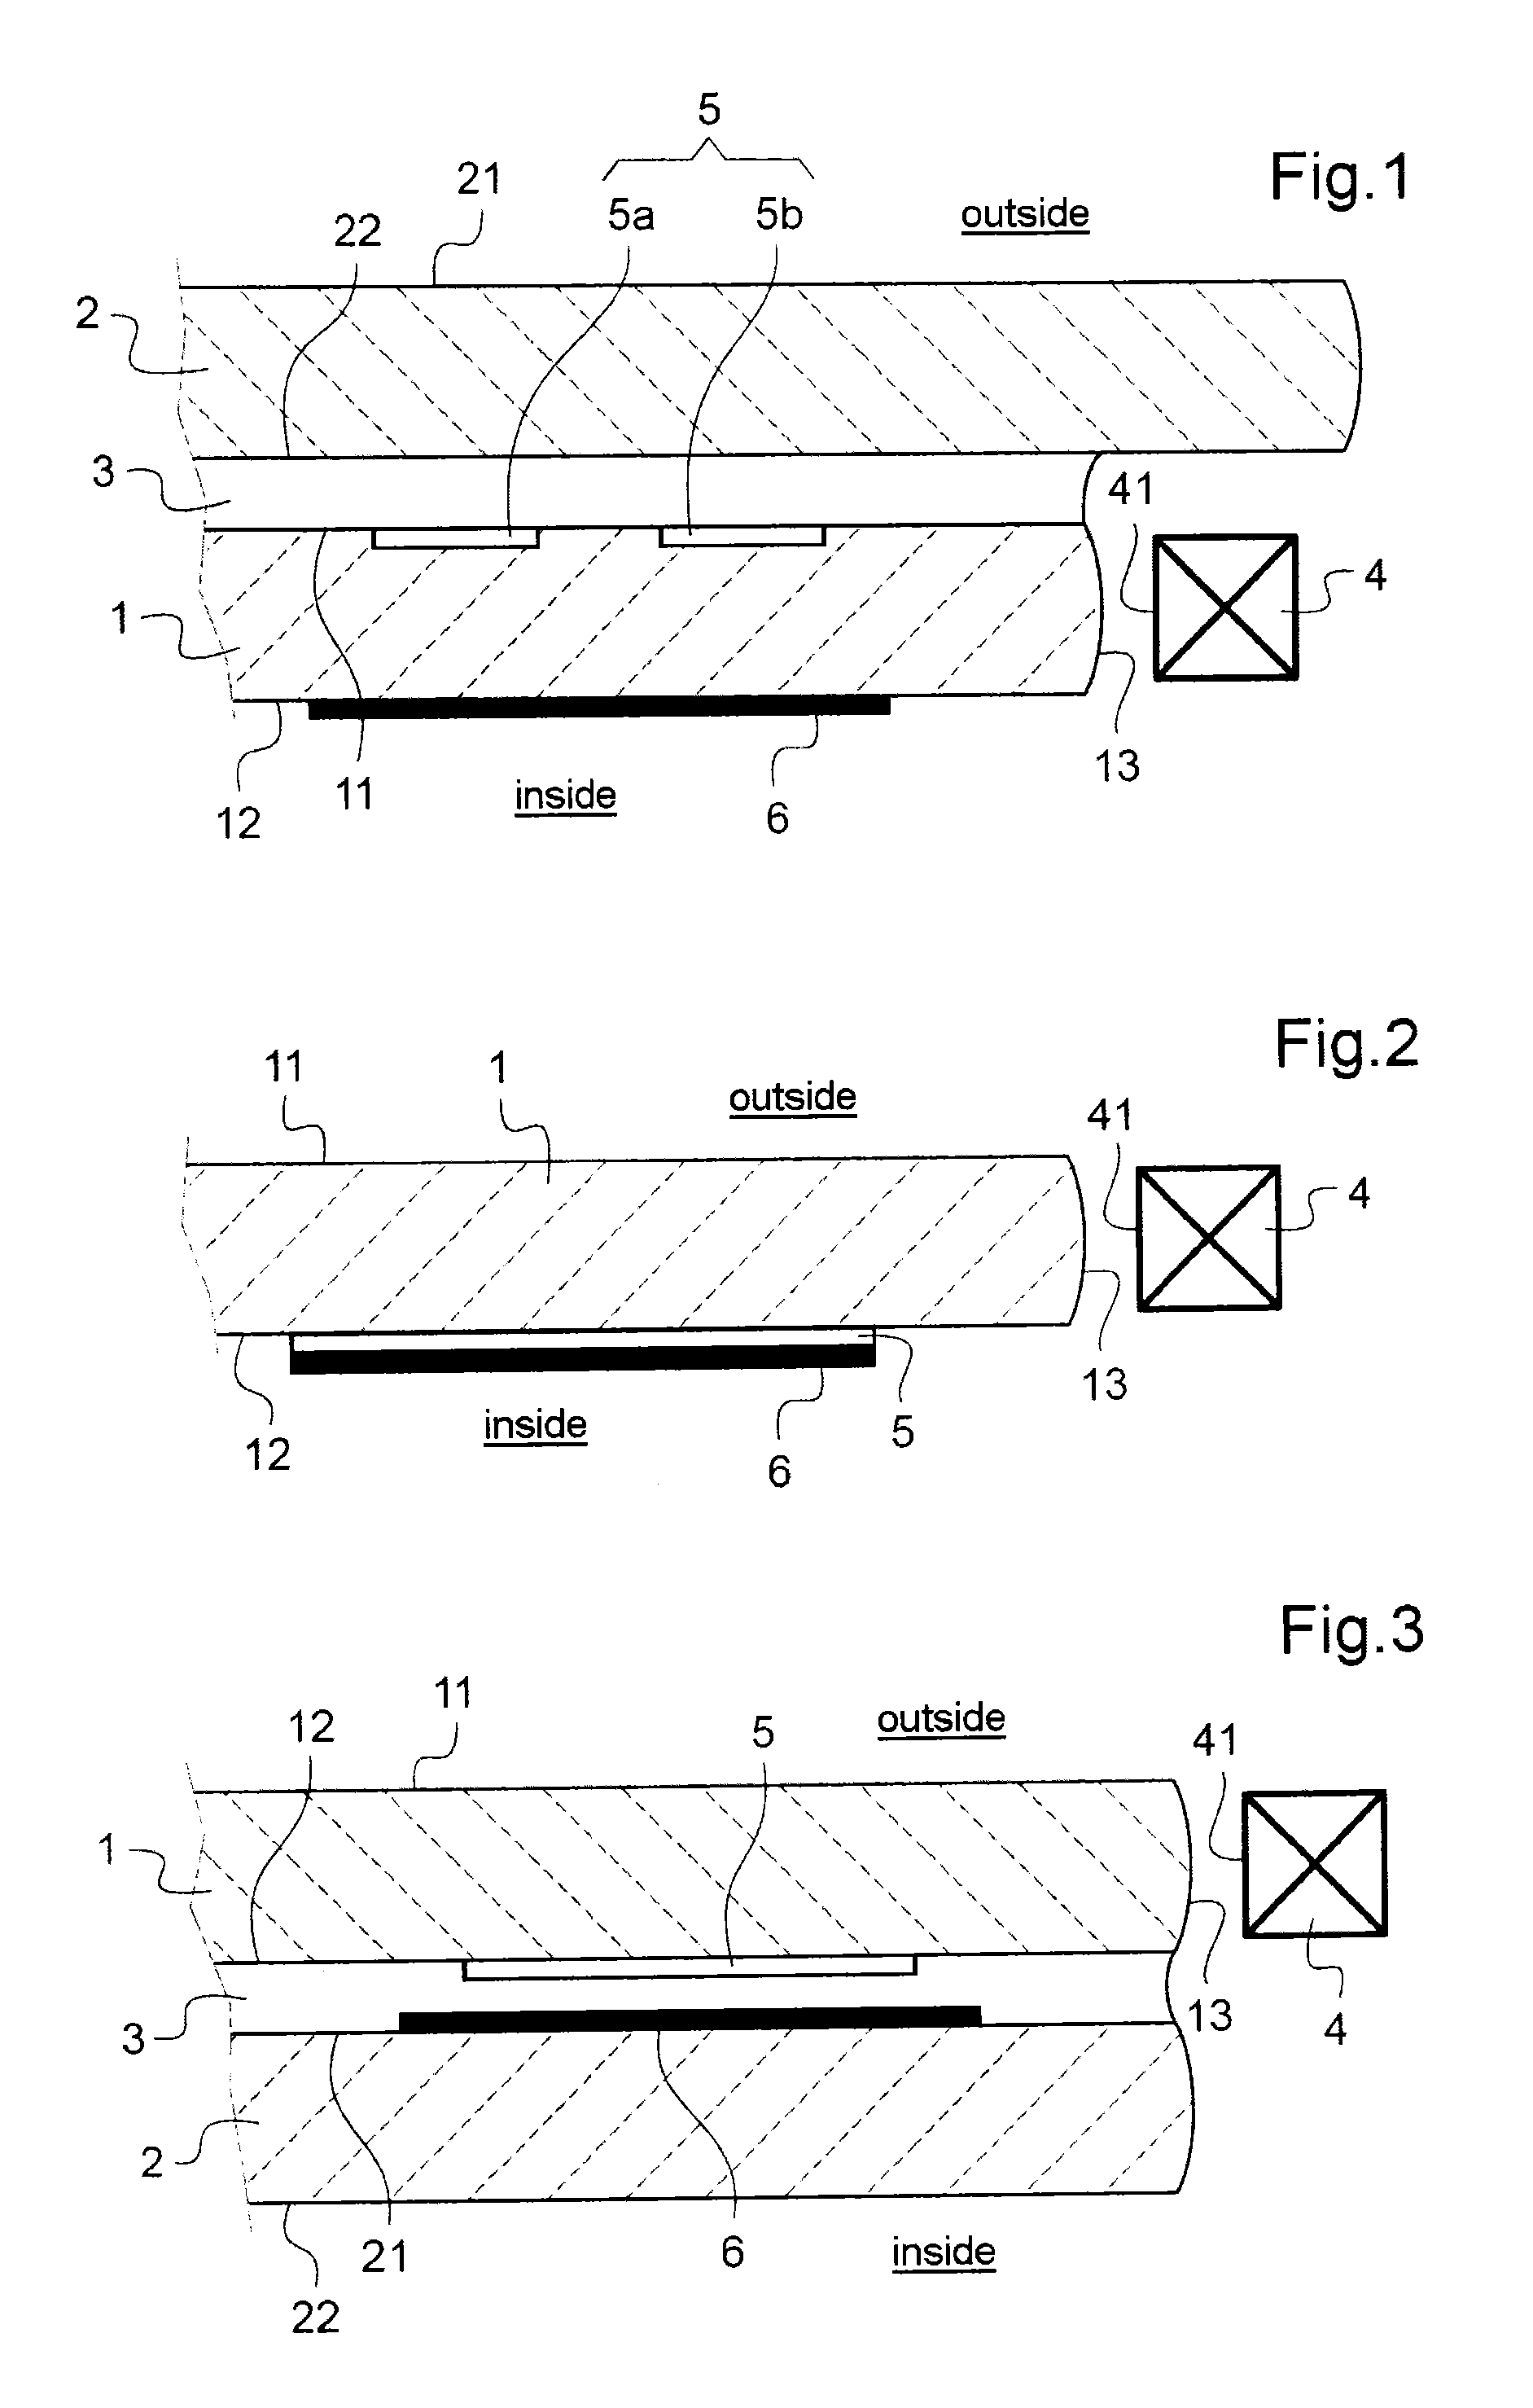 Light-signaling glazing for a vehicle